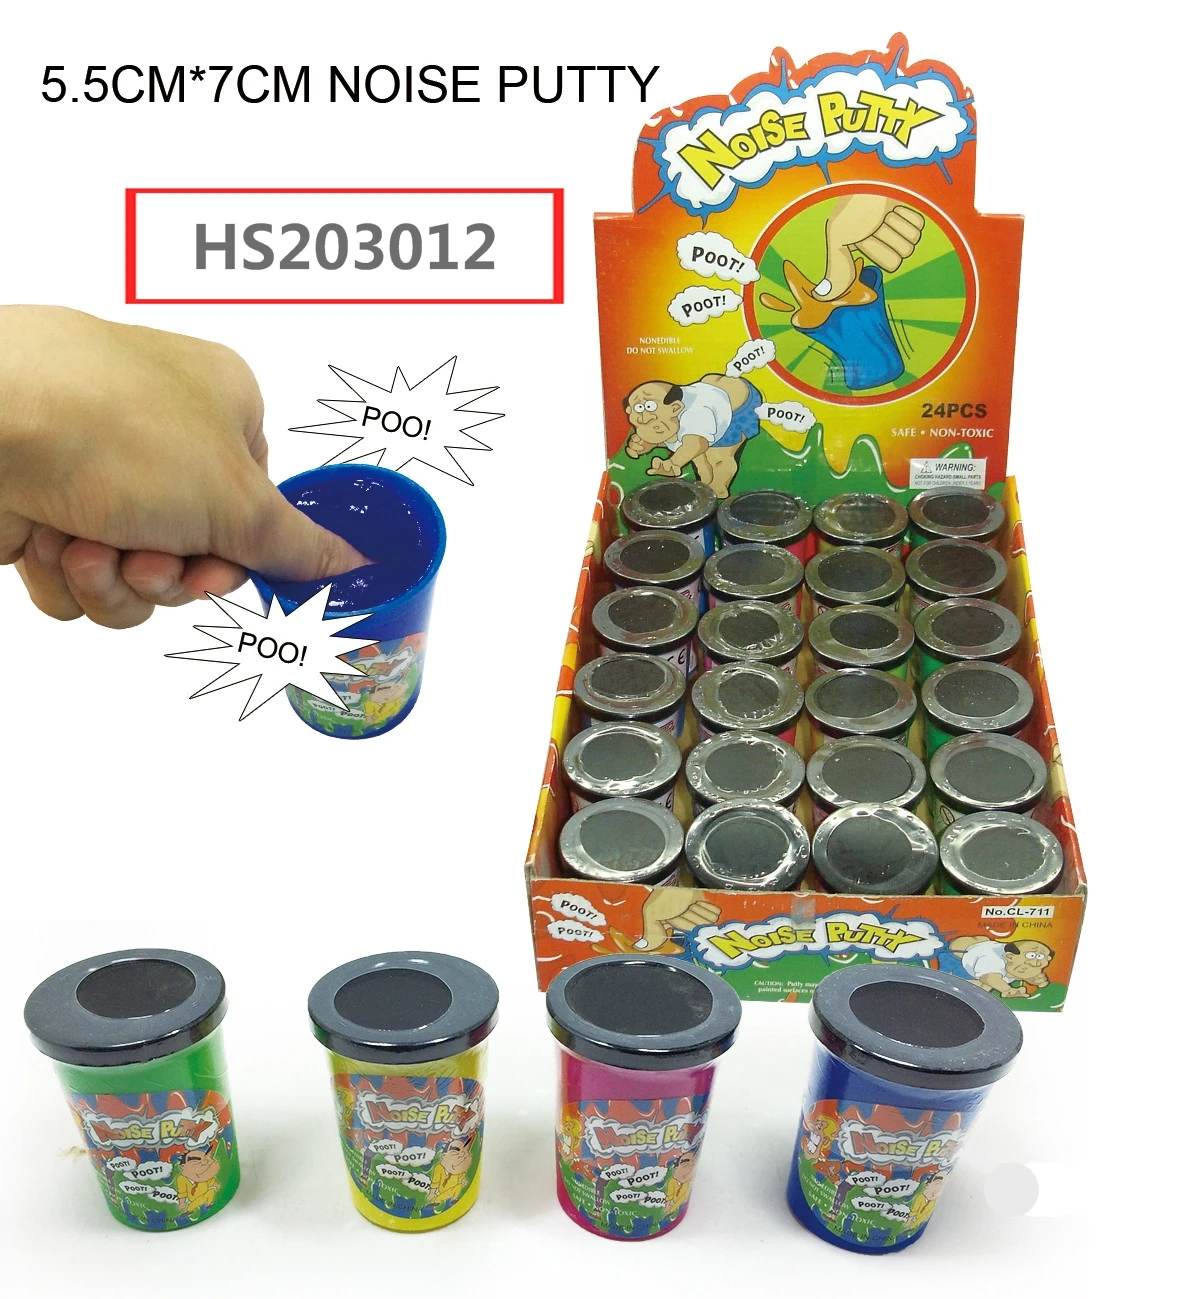 HS203012, Huwsin Toys, Fart noise putty break wind noise putty toys funny putty slime